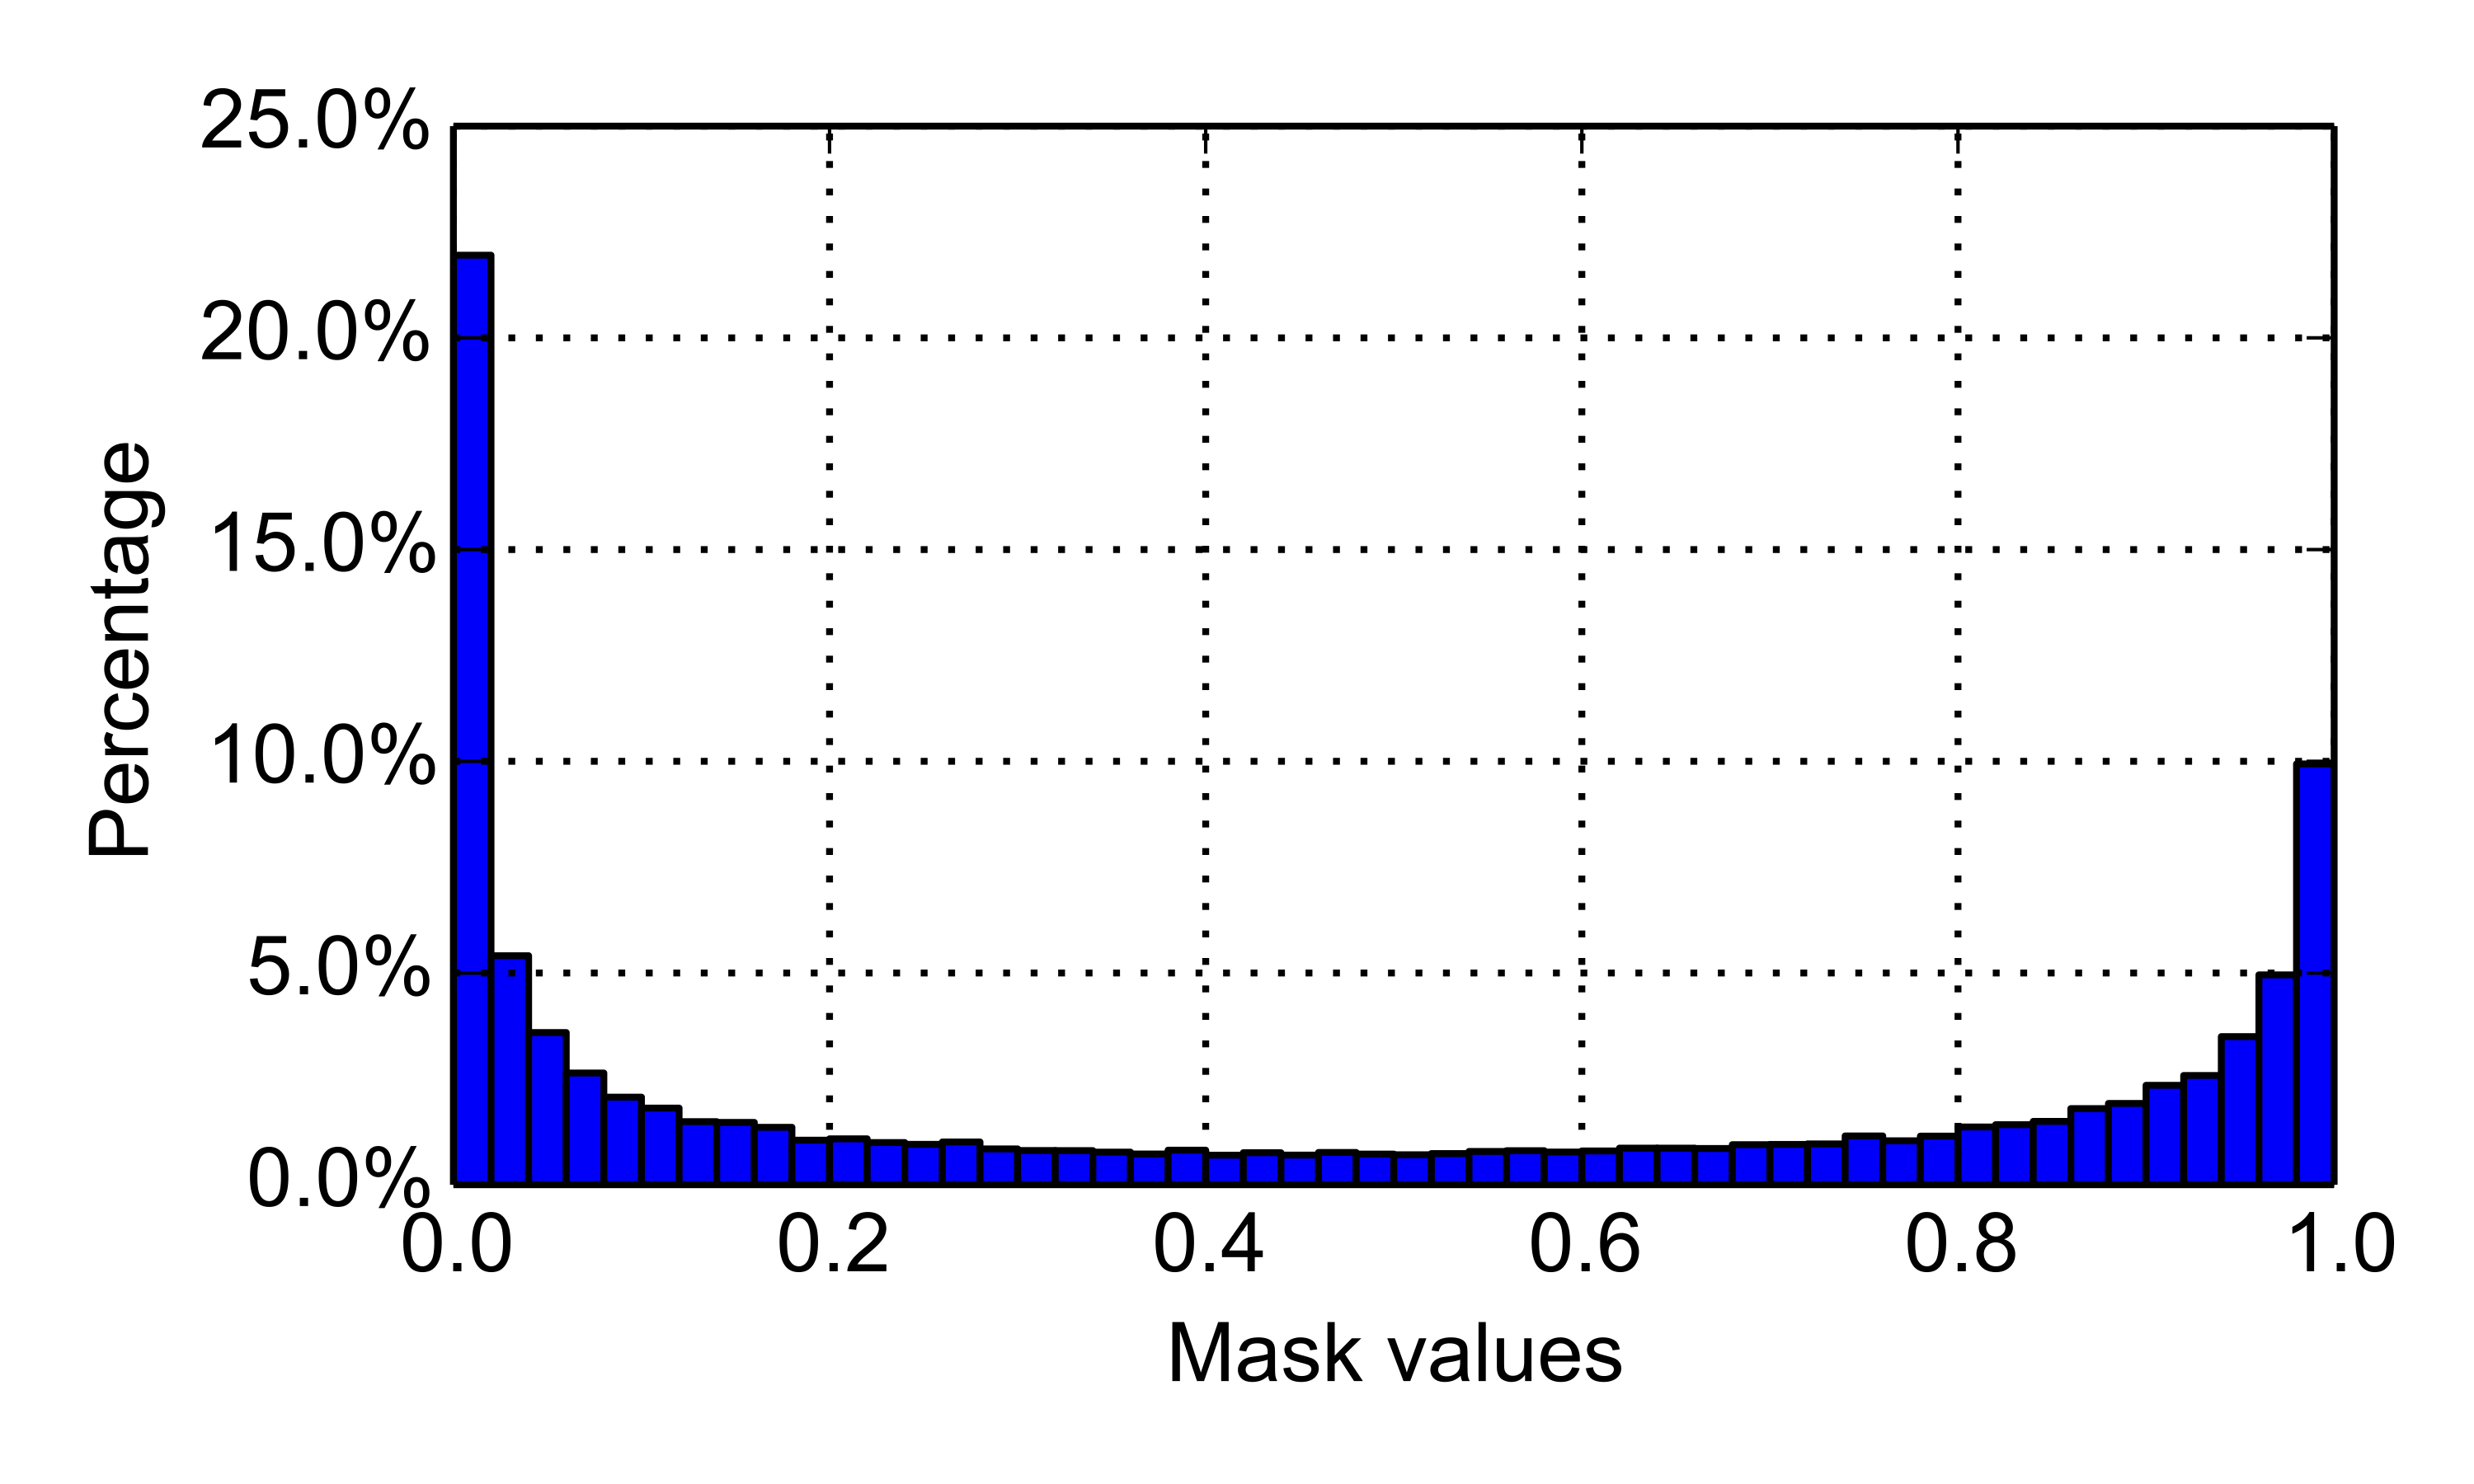 Mask values predicted by masked soft k-means on Omniglot.